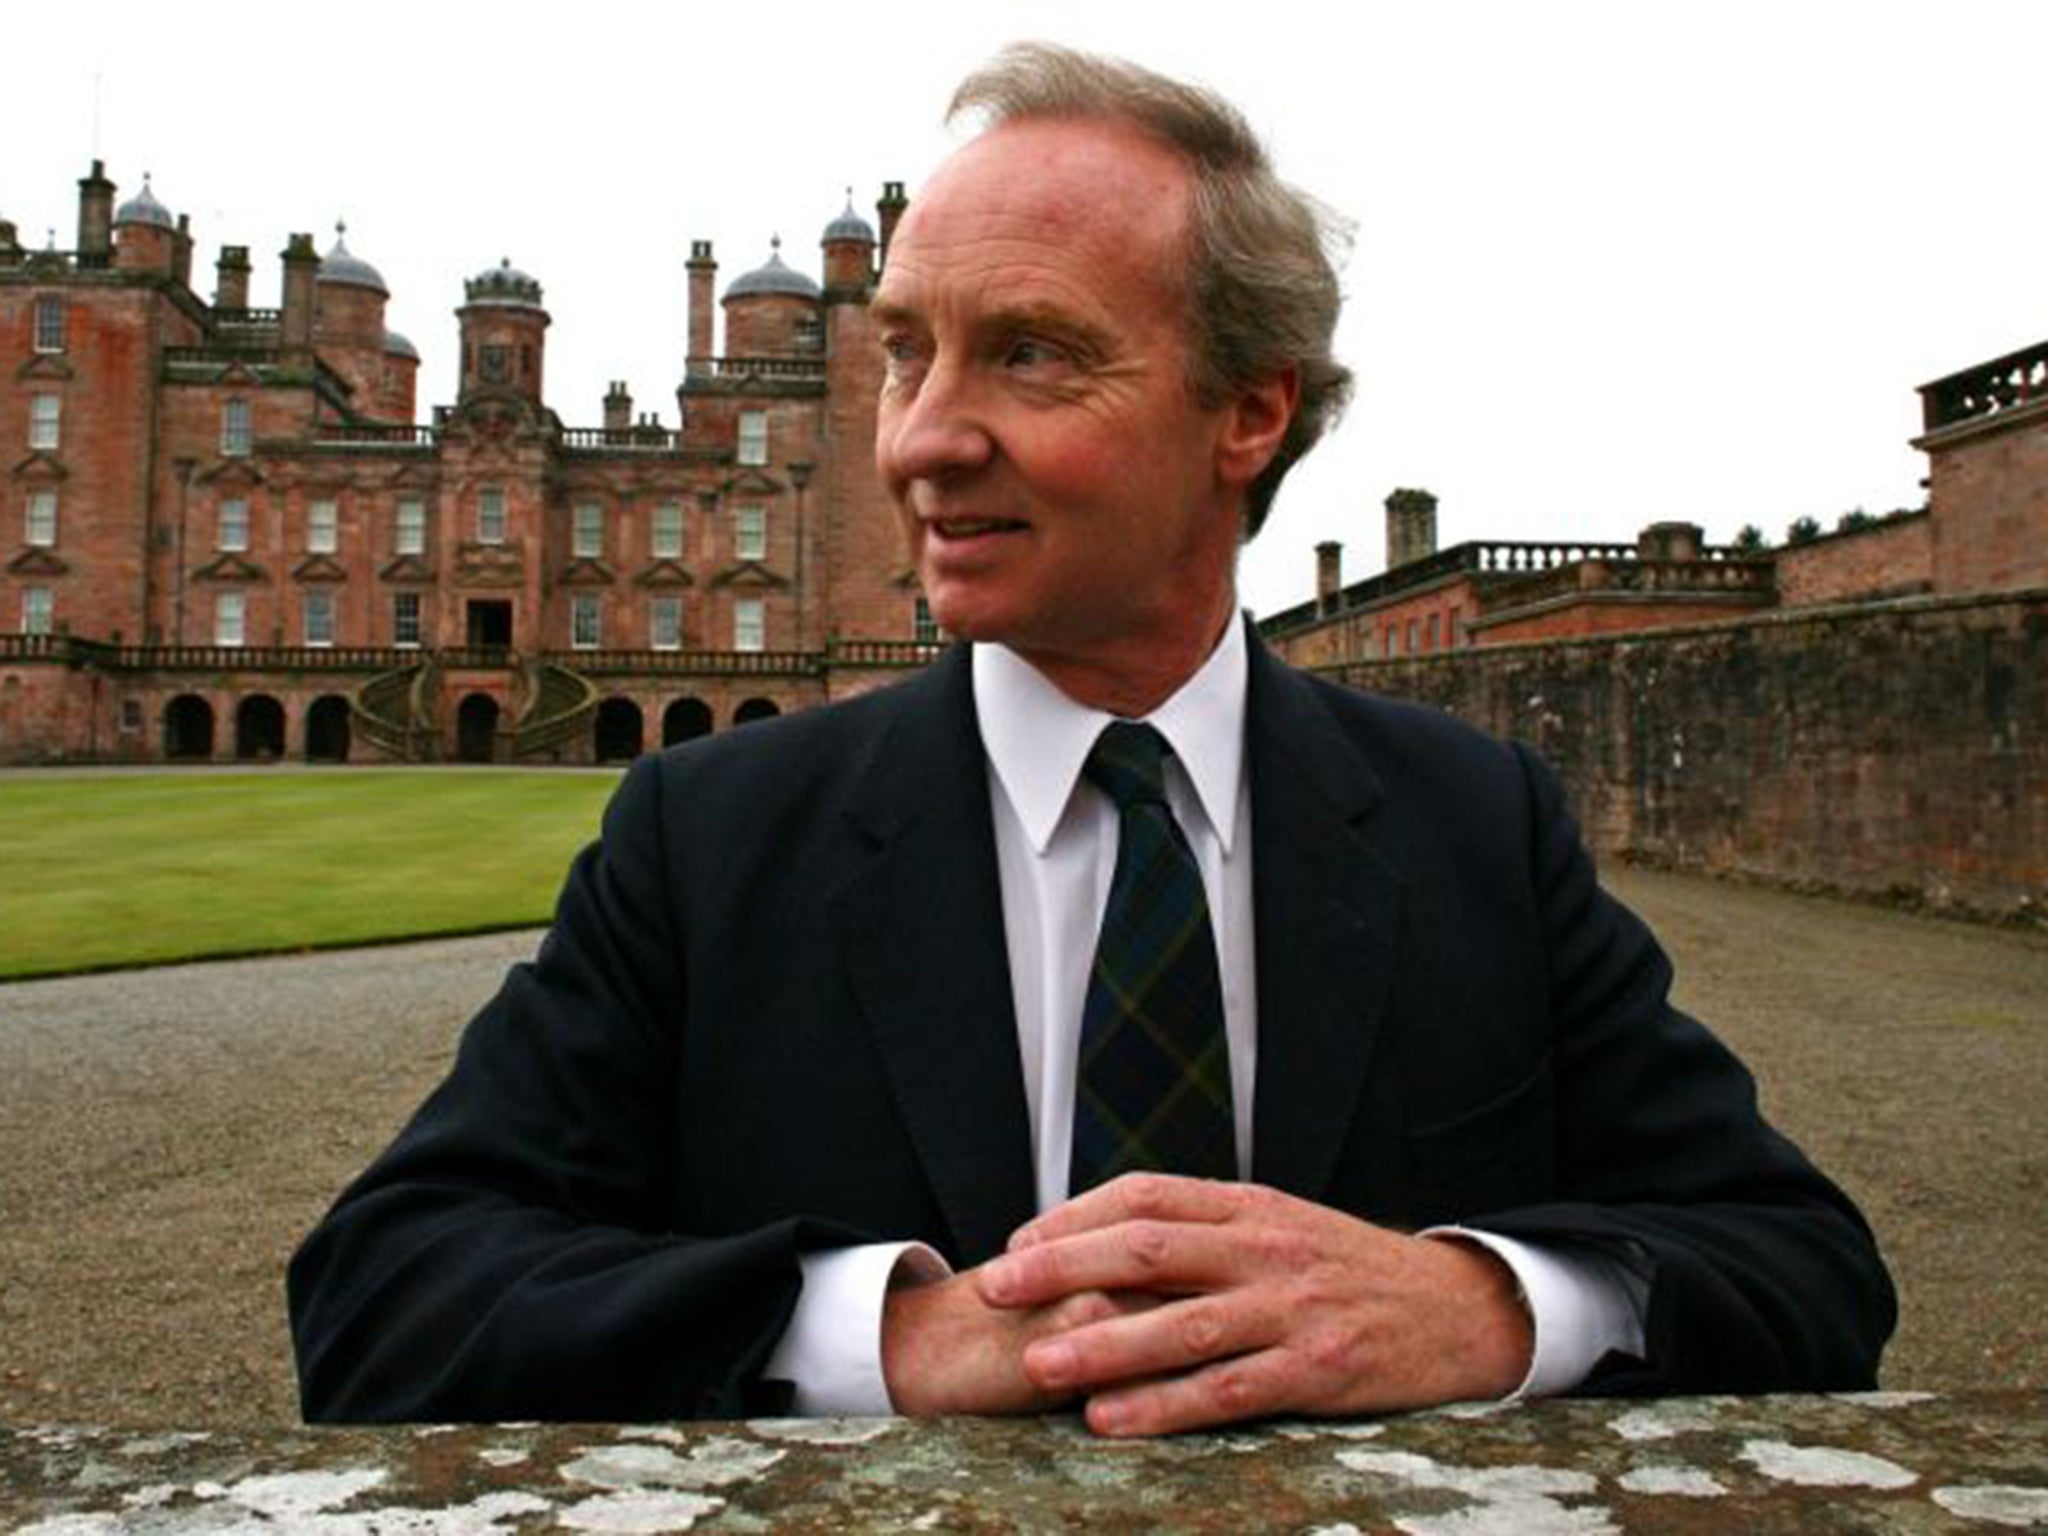 Richard Scott, the 10th Duke of Buccleuch, is the largest private landowner in Britain